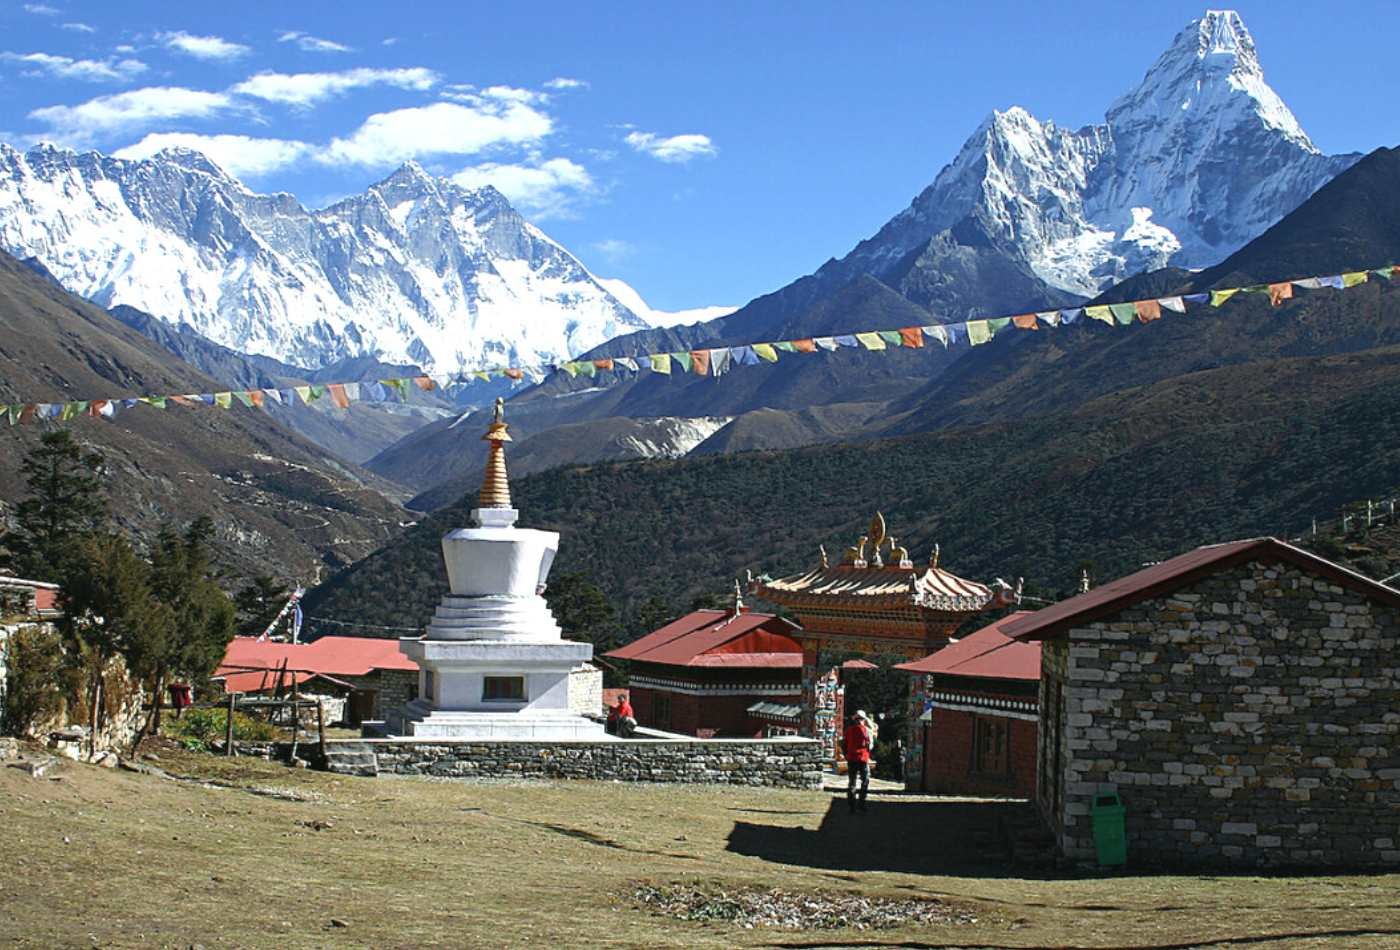 A panoramic view of Mt. Amadablam, Mt. Lhotse, and Mt. Everest as seen from Tengboche Monastery, with a traditional stupa in the foreground.